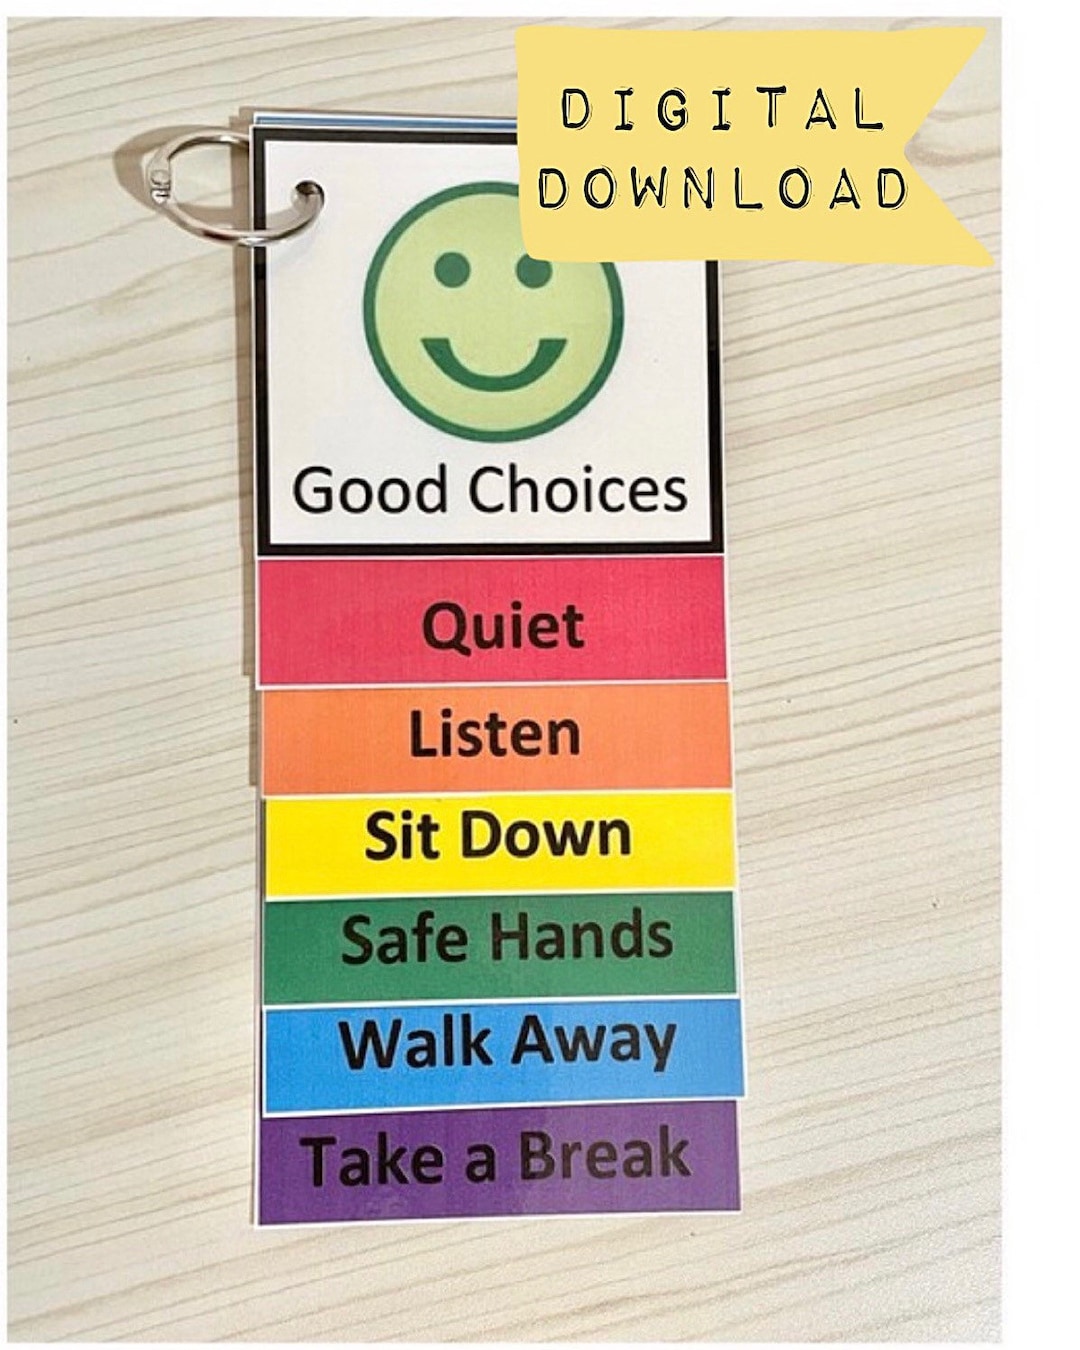 Make Good Choices Visual Aid Support Booklet Behavior Modification Digital  Download 